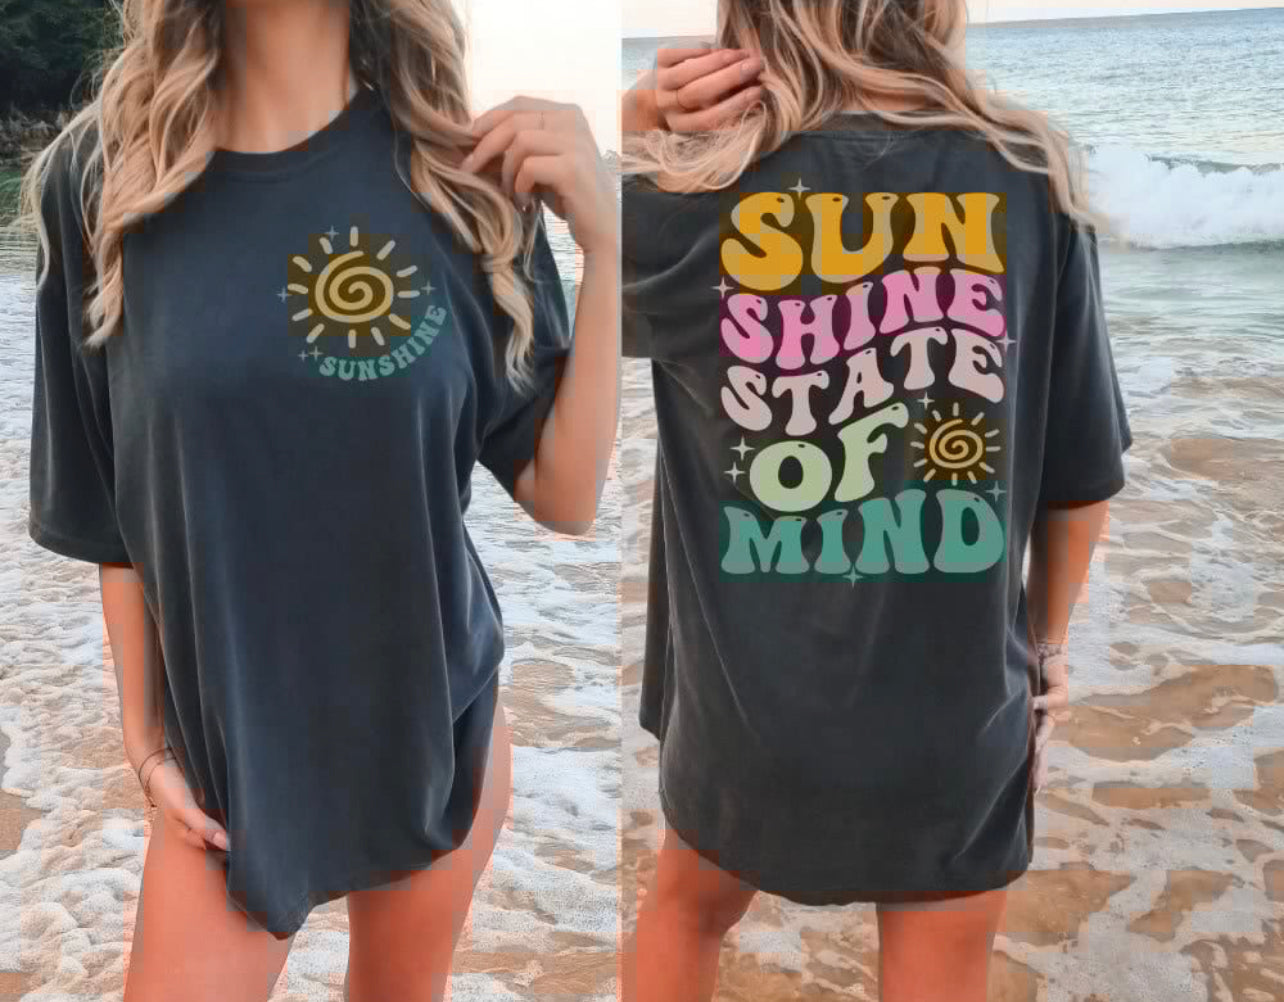 Sunshine state of mind front and back